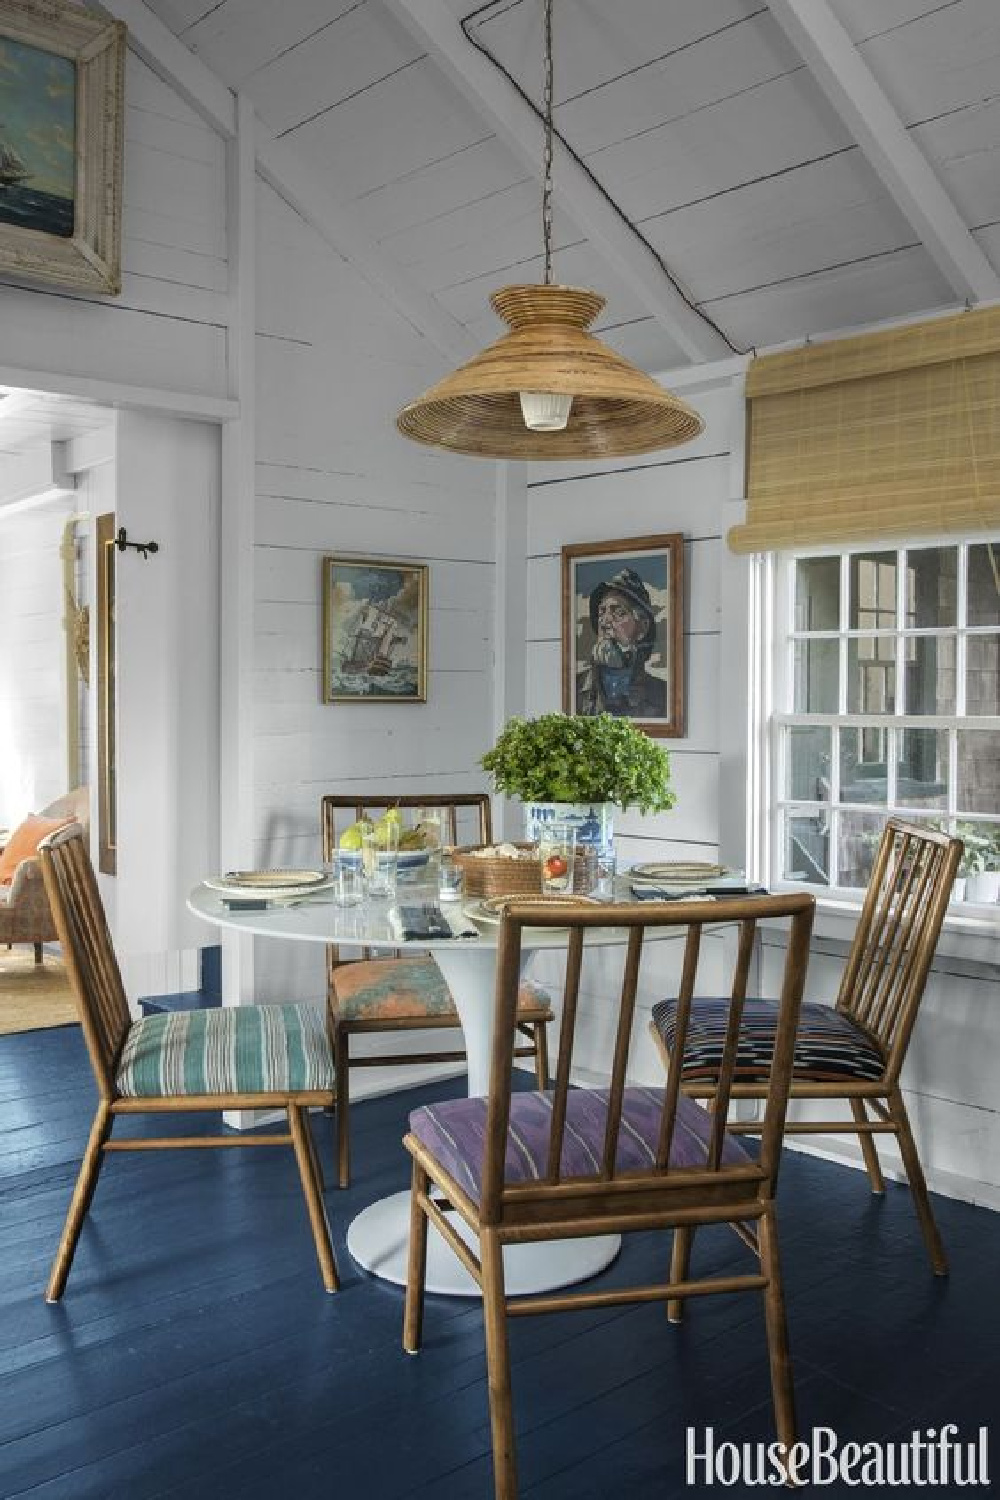 Cottage style dining area in a Nantucket cottage with rustic decor and colorful design. COME TOUR MORE Nantucket Style Chic & Summer Vibes! #nantucket #interiordesign #designinspiration #summerliving #coastalstyle